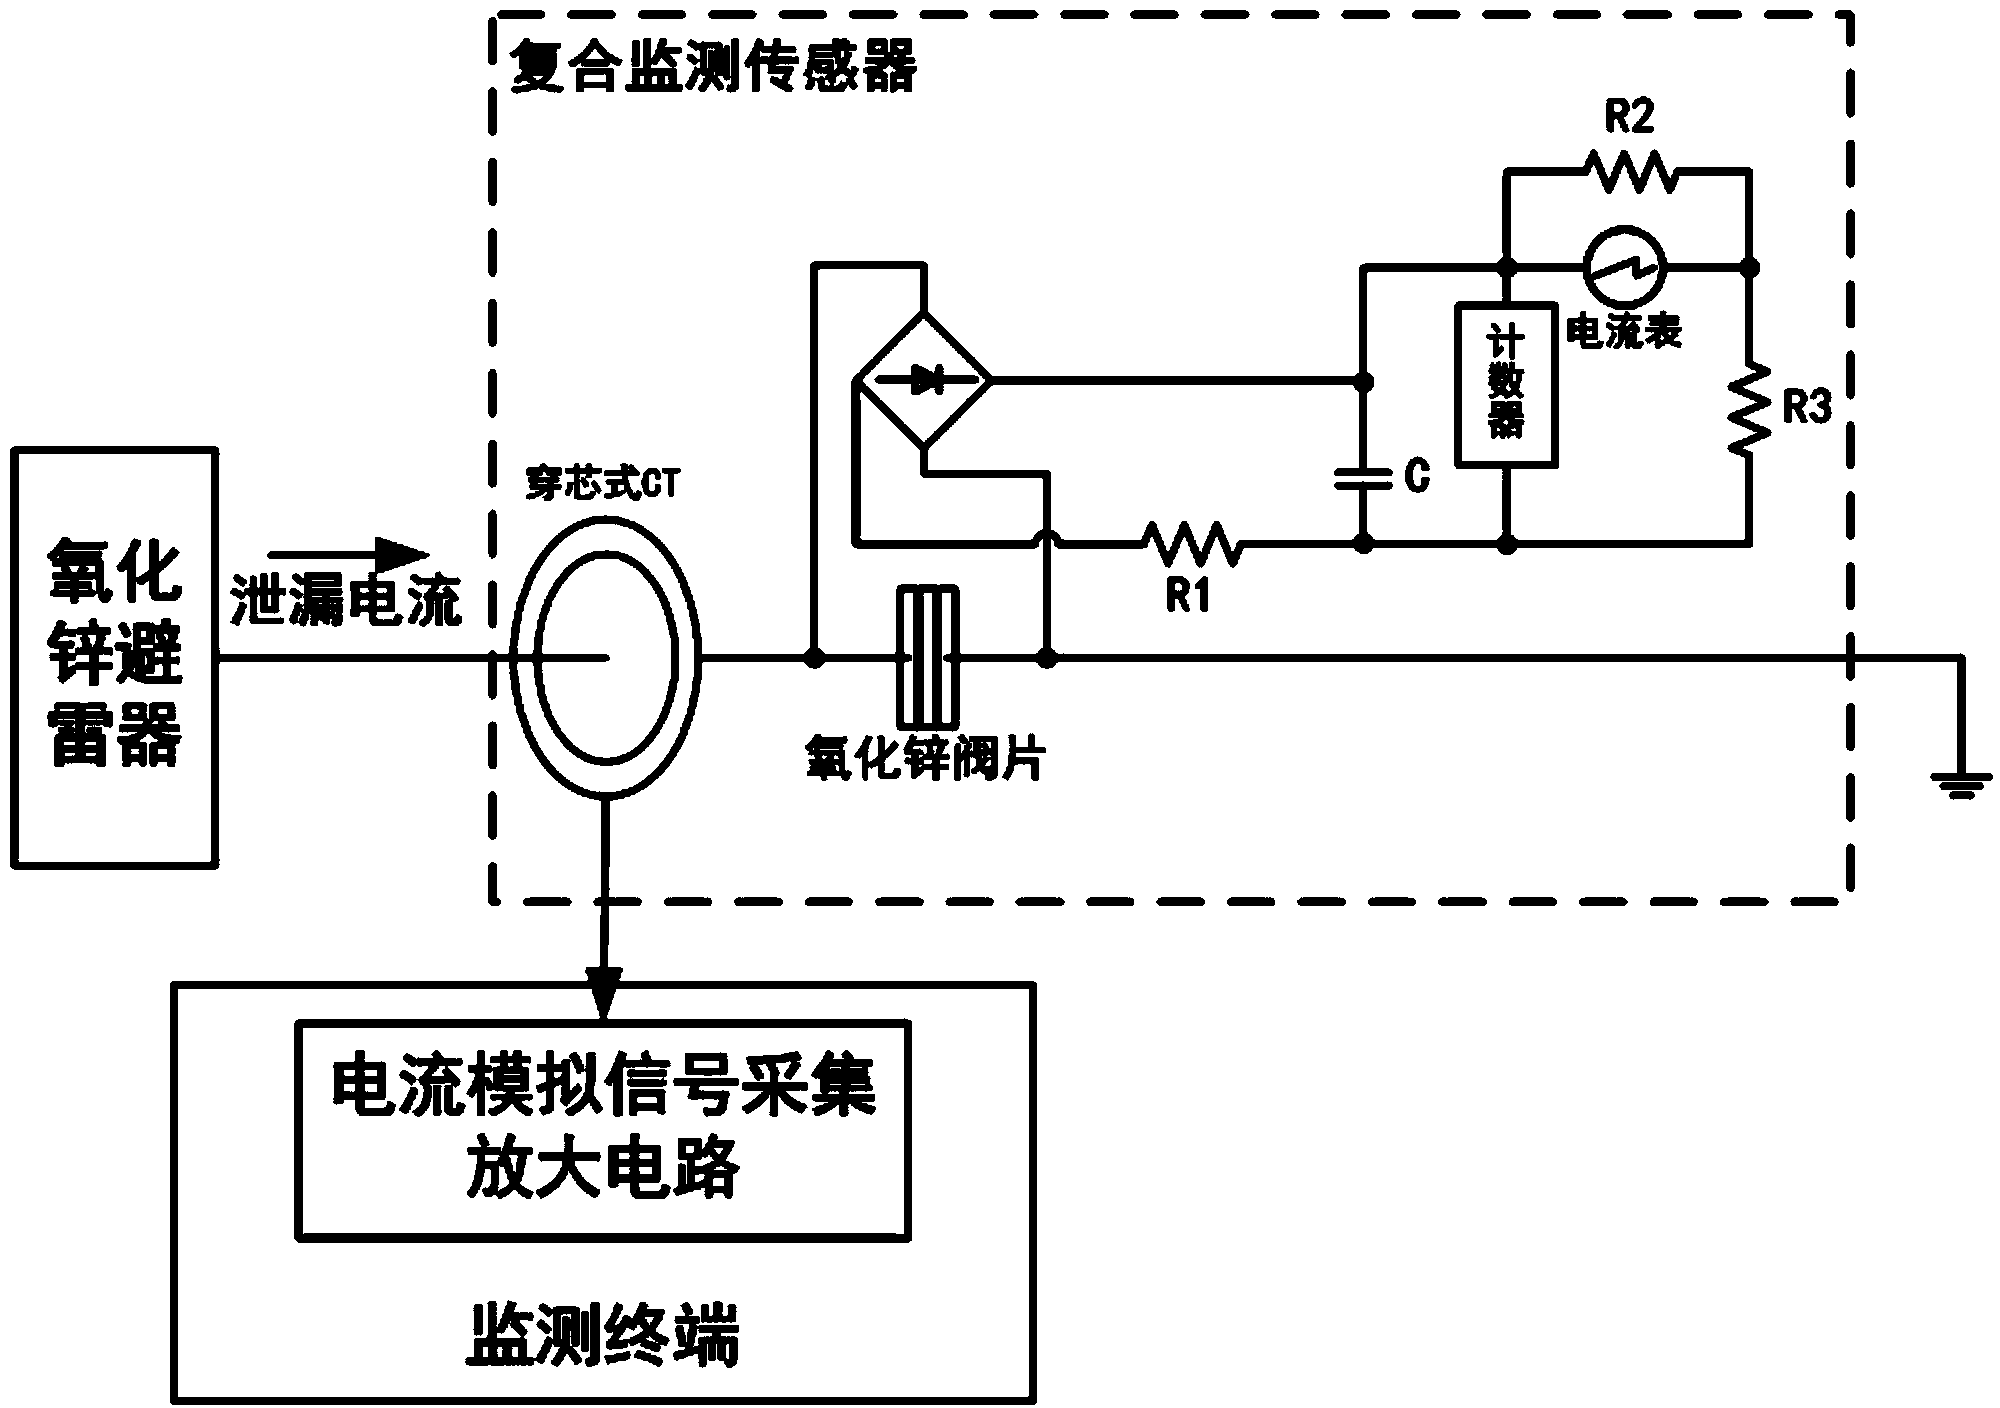 Insulation online state monitoring device of zinc oxide arrester